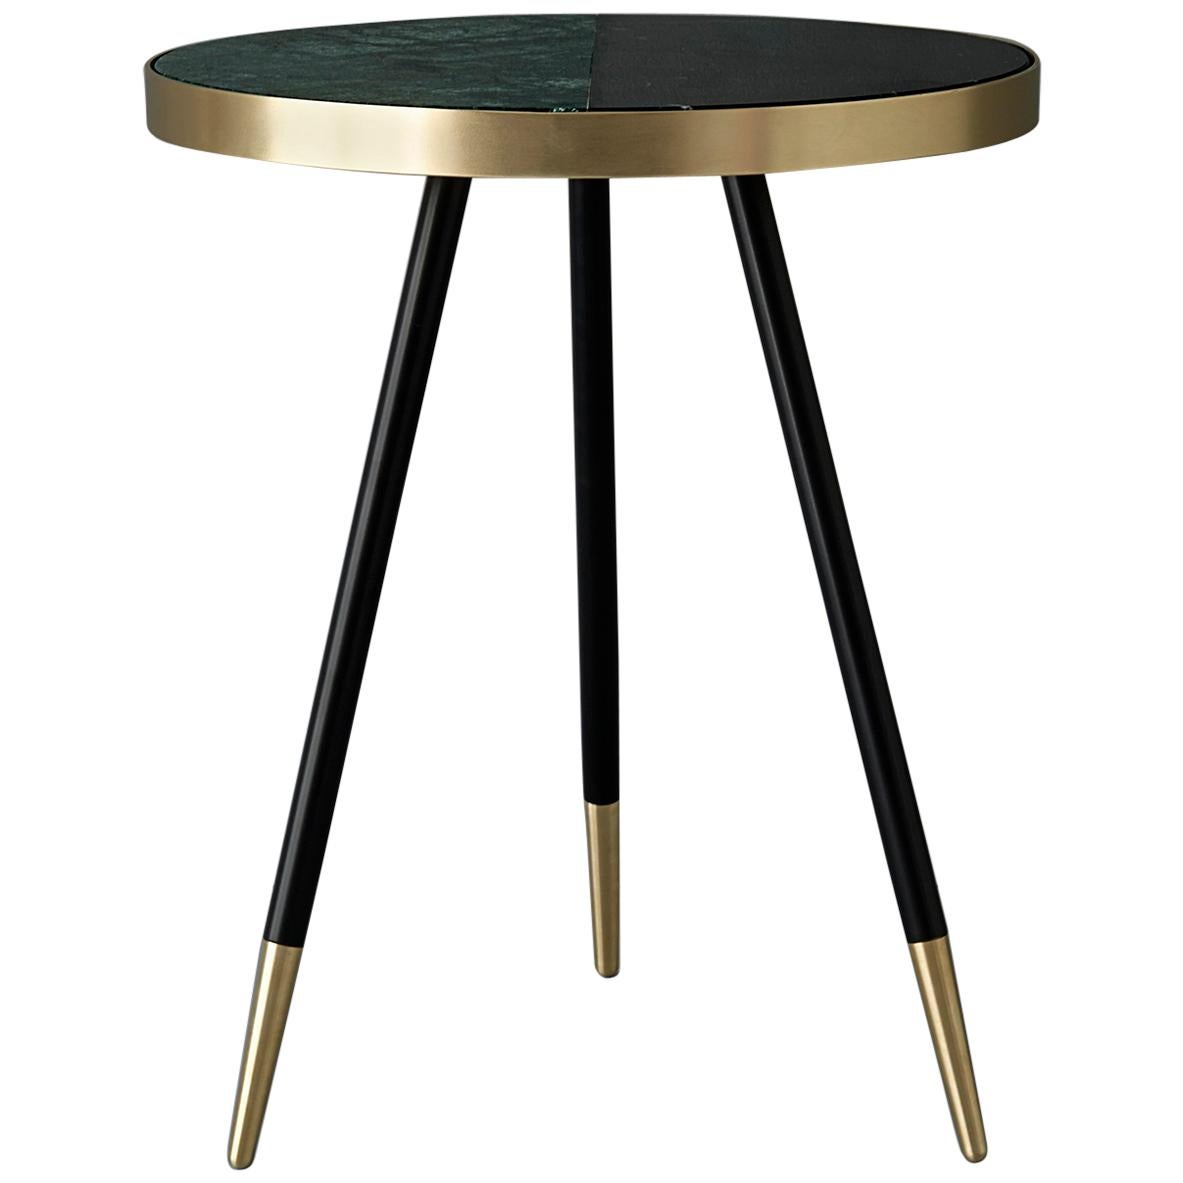 Bethan Gray Band Side Table Two Tone Black and Green with Black and Brass Base